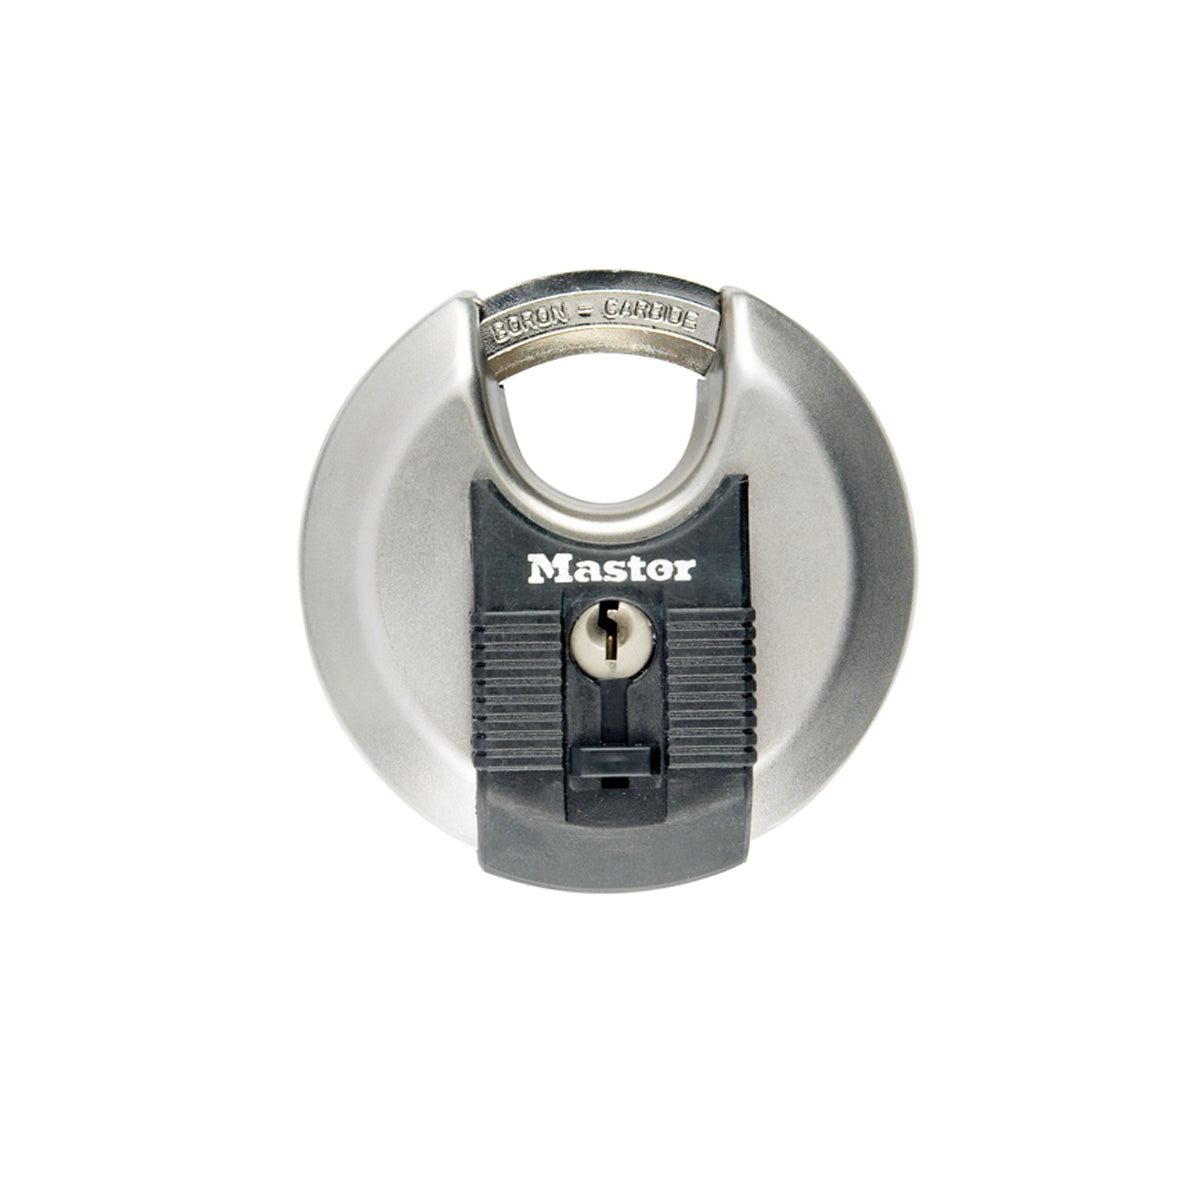 Masterlock EXCELL DISCUS 70MM PADLOCK 10MM OCTAGONAL SHACKLE 4 PIN CYLINDER